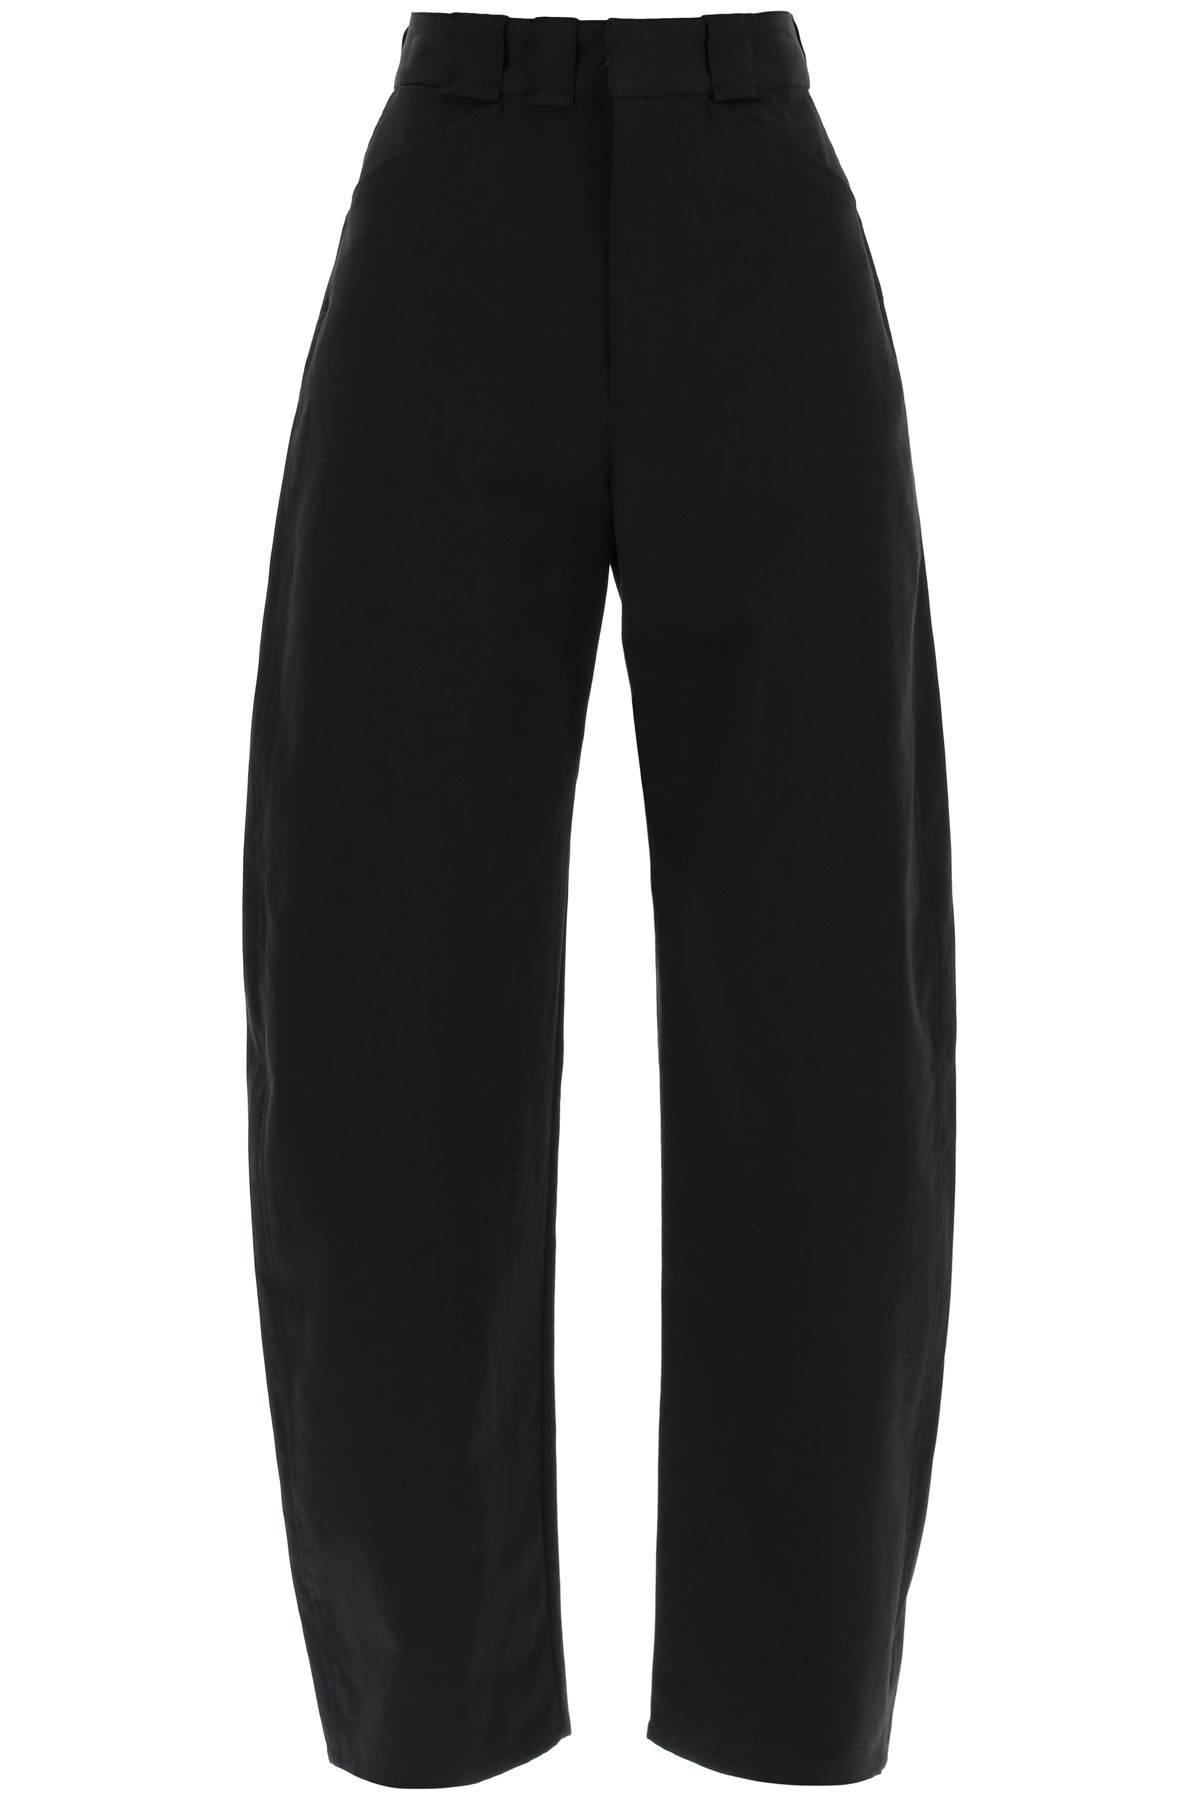 Lemaire LEMAIRE loose curved leg pants